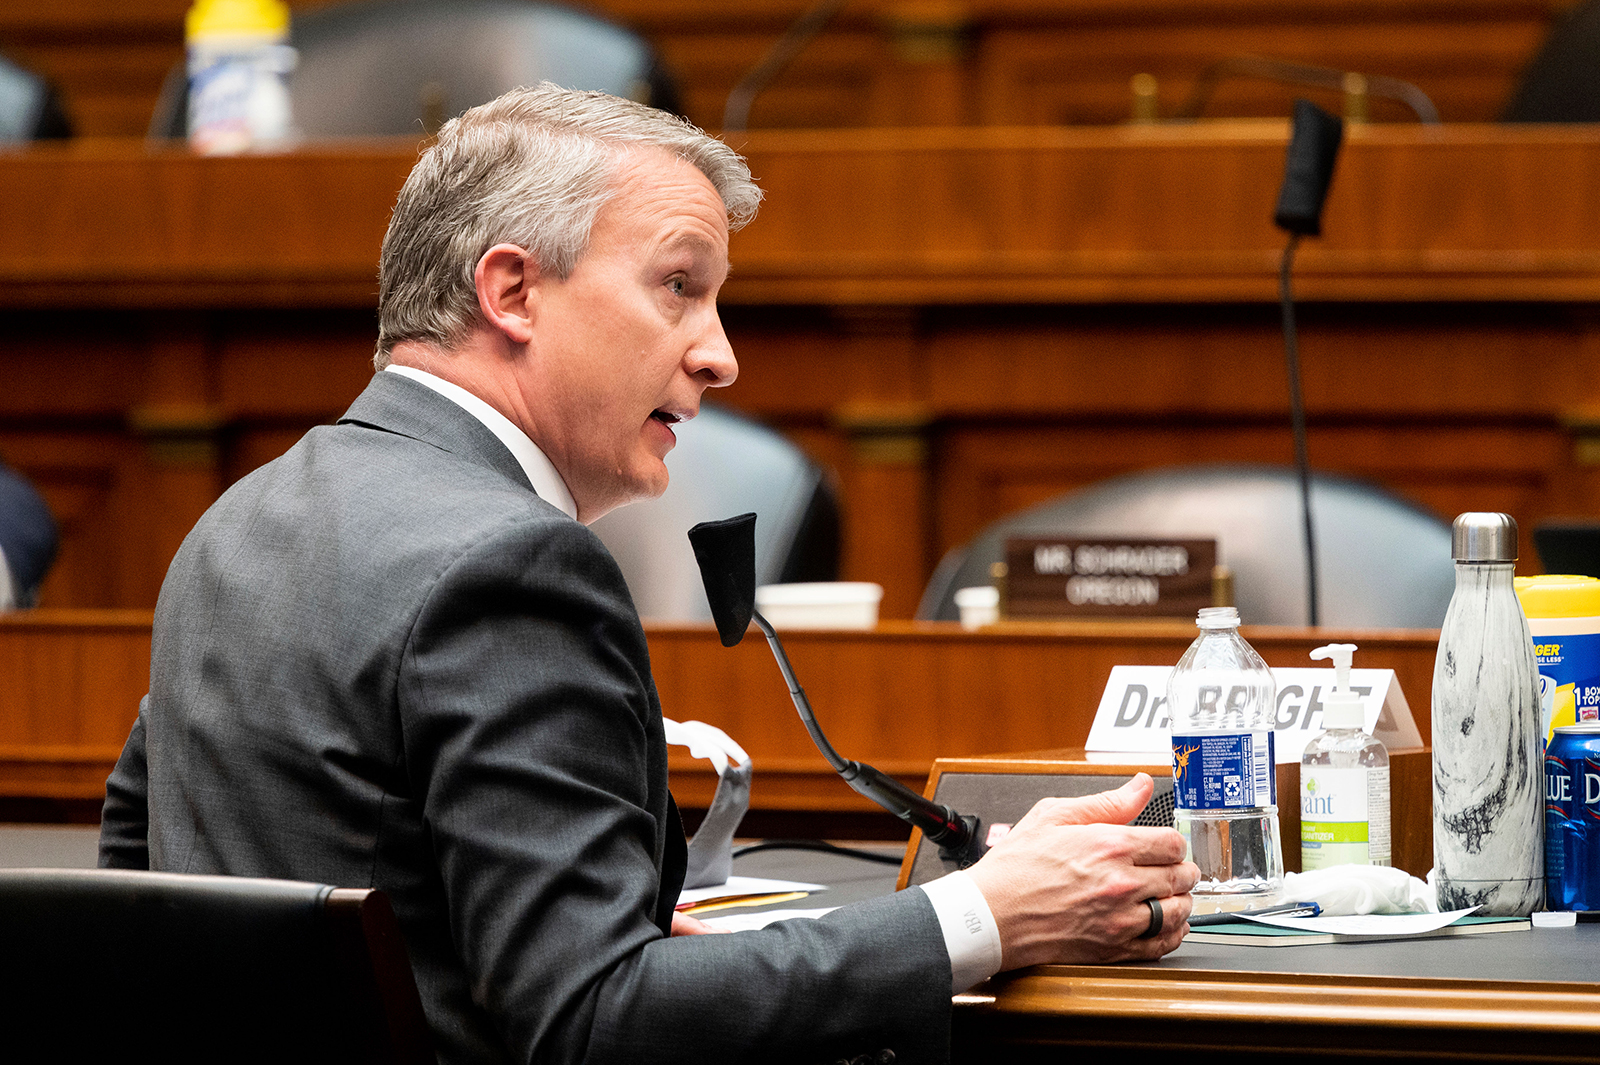 Dr. Rick Bright, ousted director of vaccine agency, speaks at the House Committee on Energy and Commerce Subcommittee on Health hearing on "Protecting Scientific Integrity in the COVID-19 Response" on Thursday, May 14.